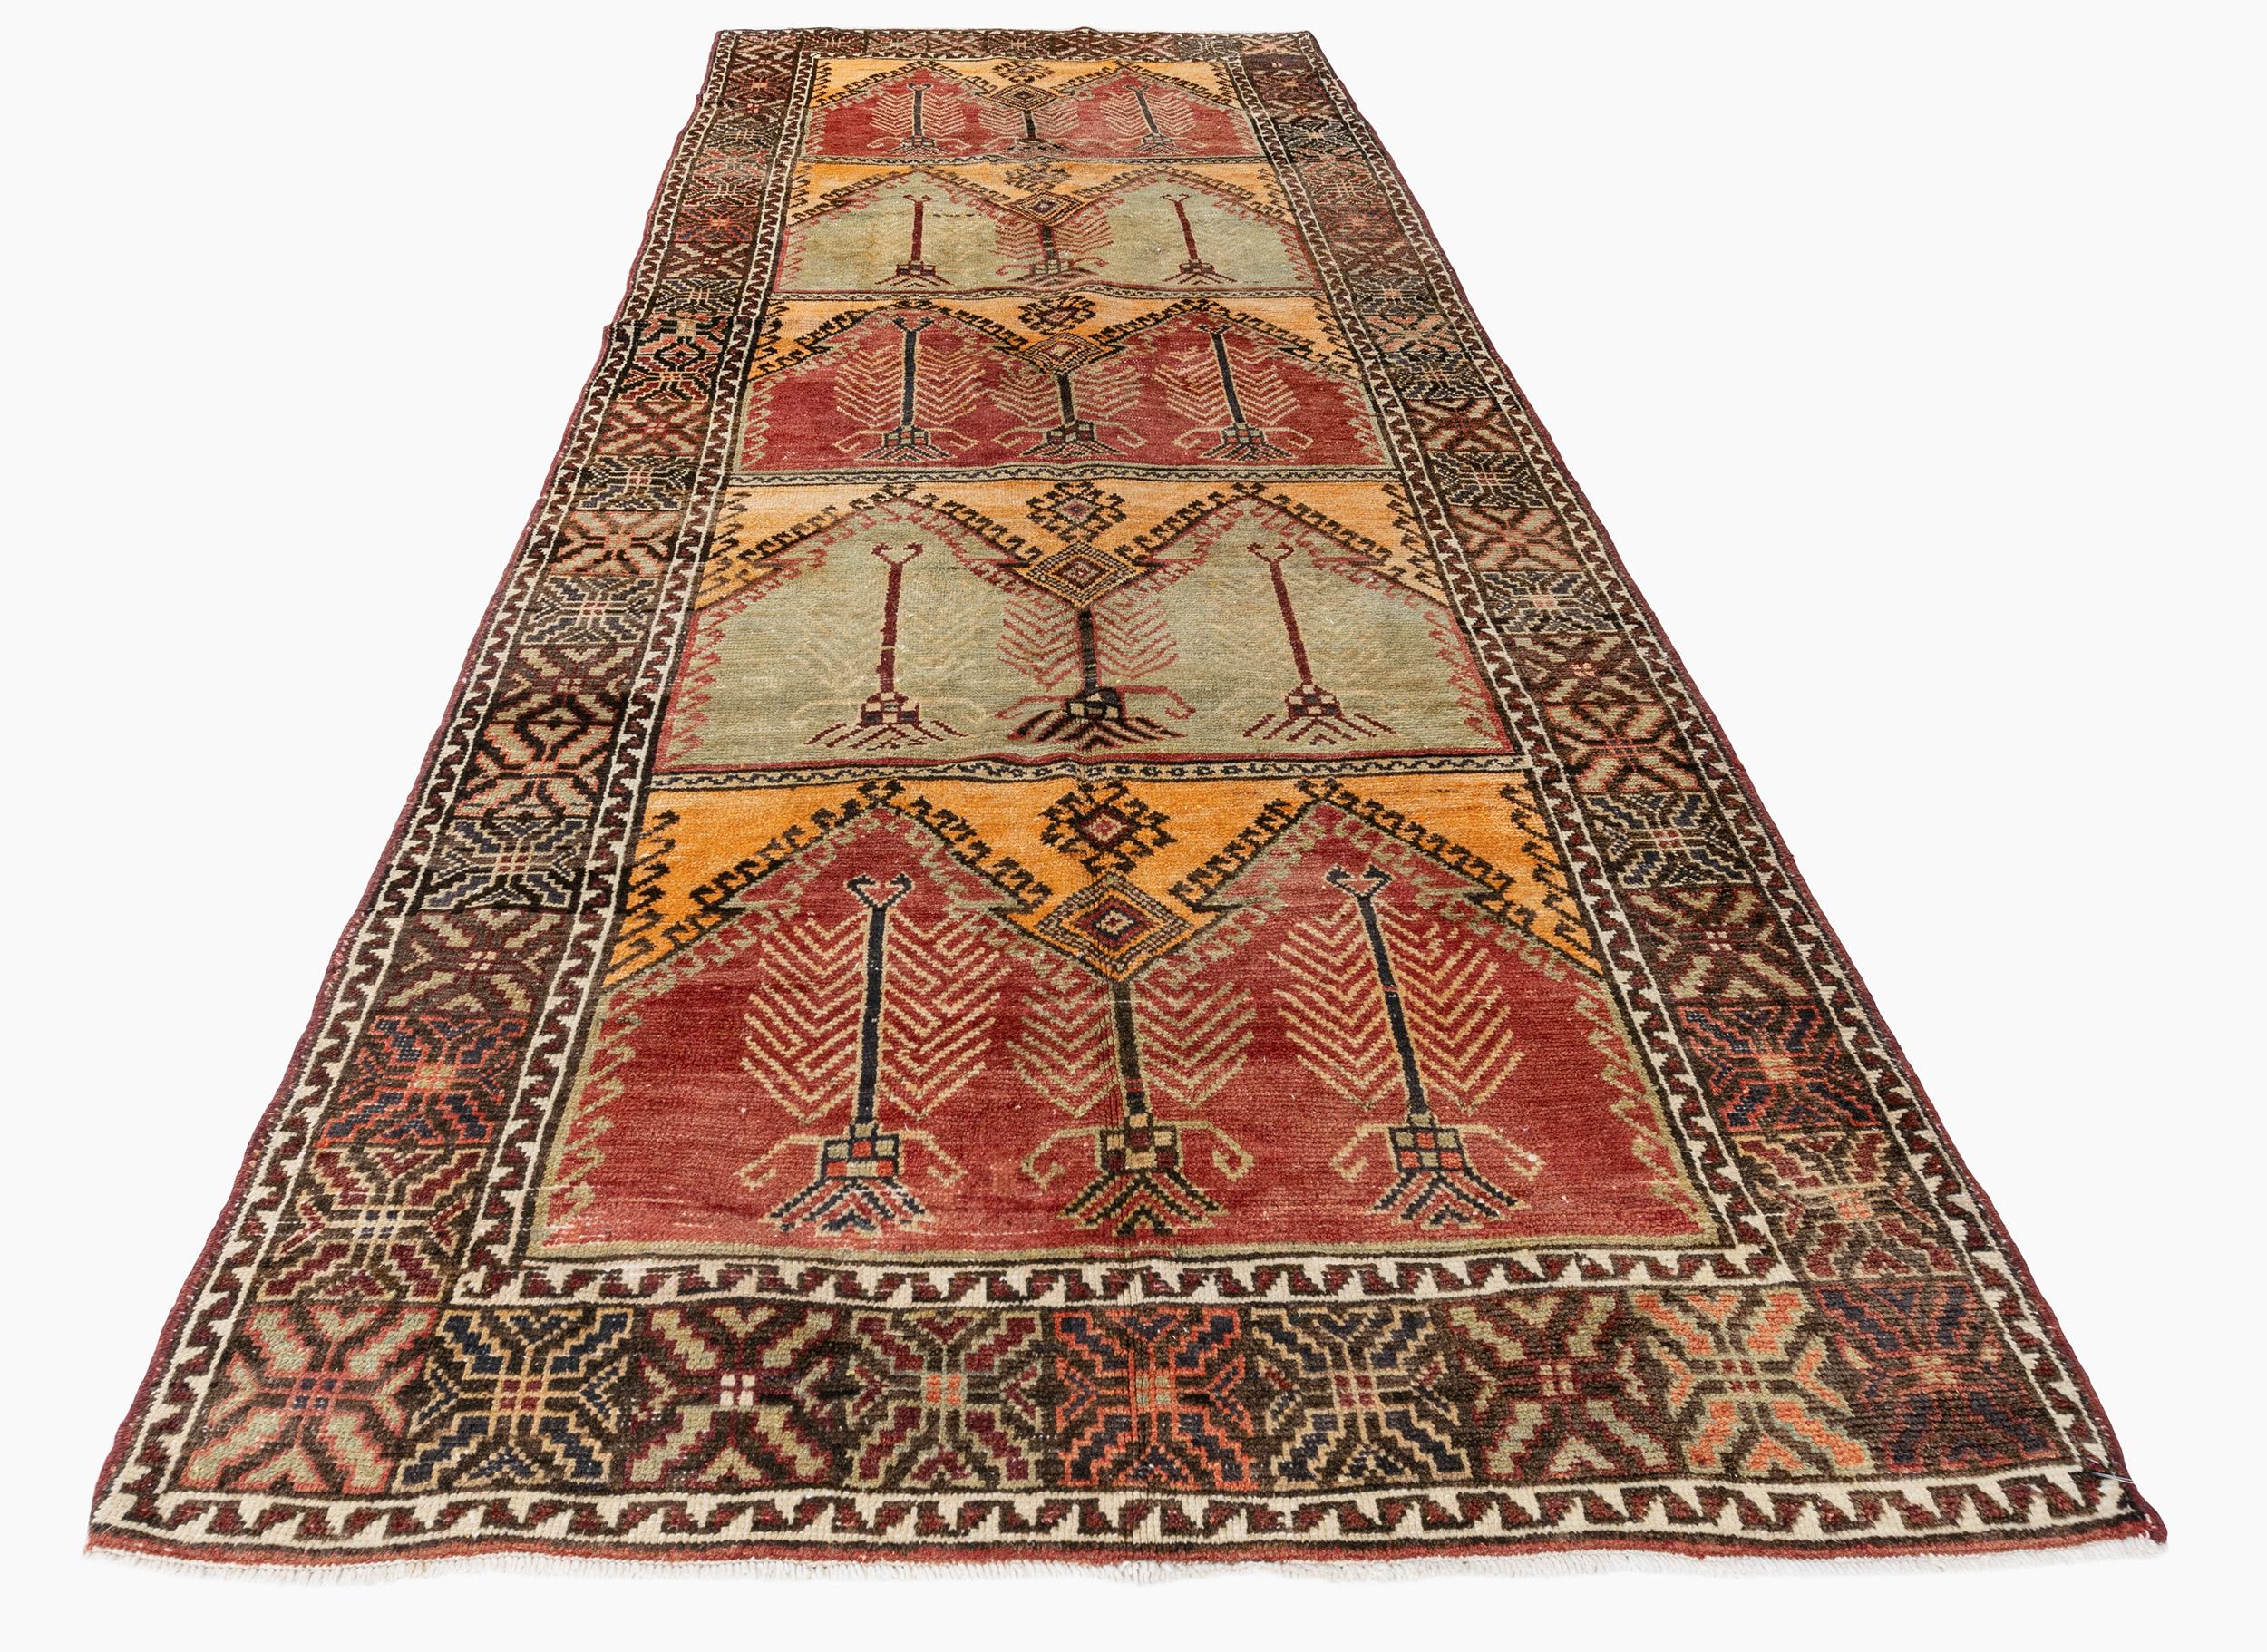 Vintage Turkish Oushak rug 4'9 X 12'8. The luxurious quality of the wool (for which Oushaks have always been famous) contributed to the vibrancy of the colors. Unlike most Turkish rugs, Oushak rugs were heavily influenced by Persian design. Many